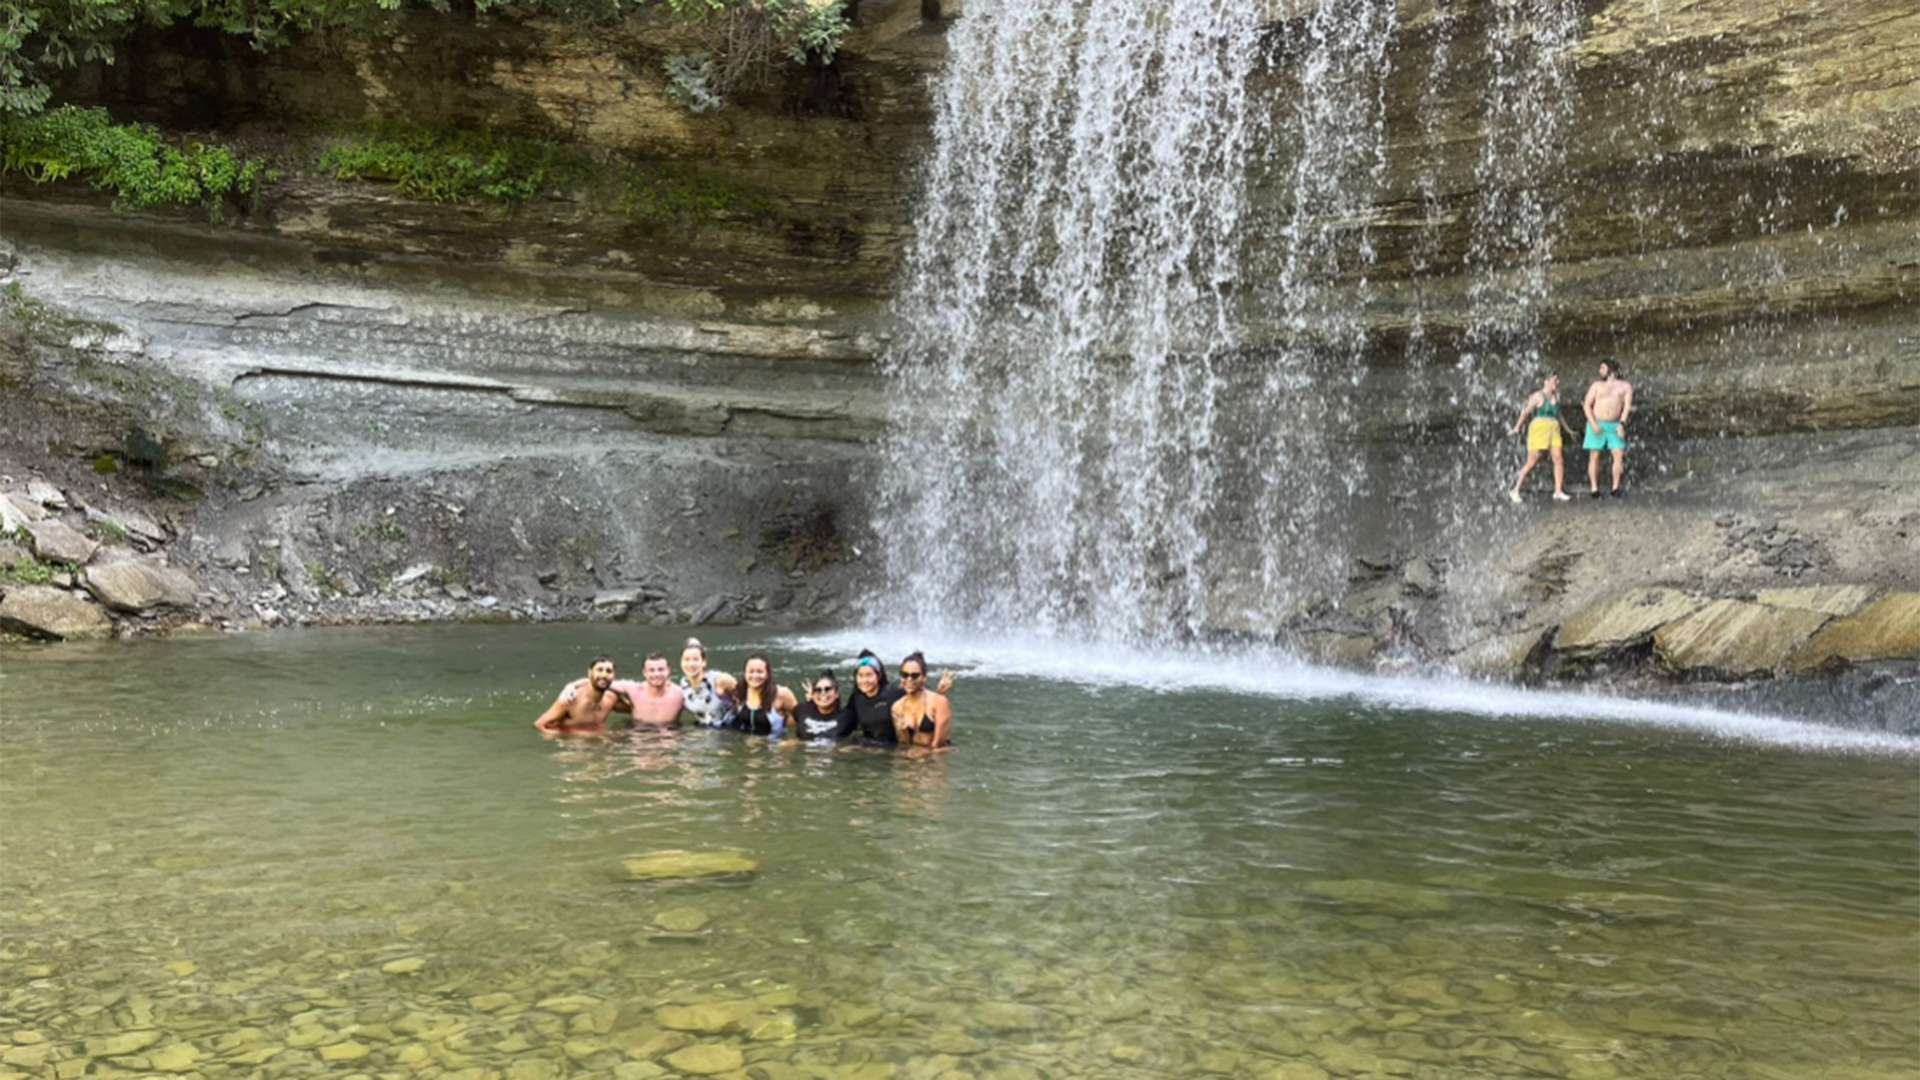 7 people in the middle of a natural body of water huddled together smiling into the camera, under a water fall